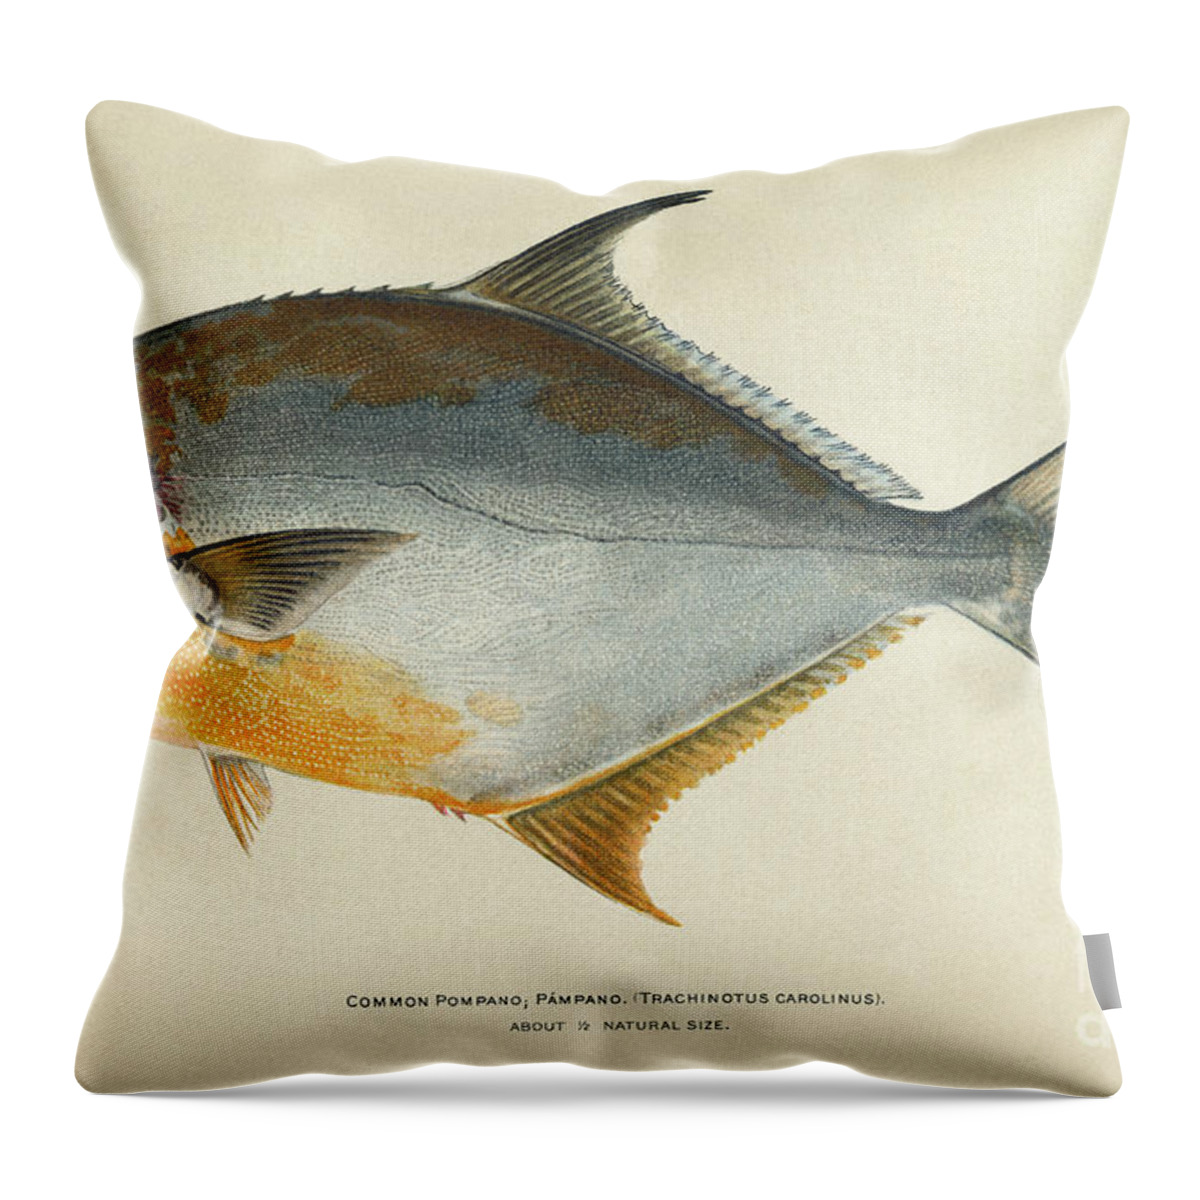 1903 Throw Pillow featuring the photograph Florida Pompano by Granger